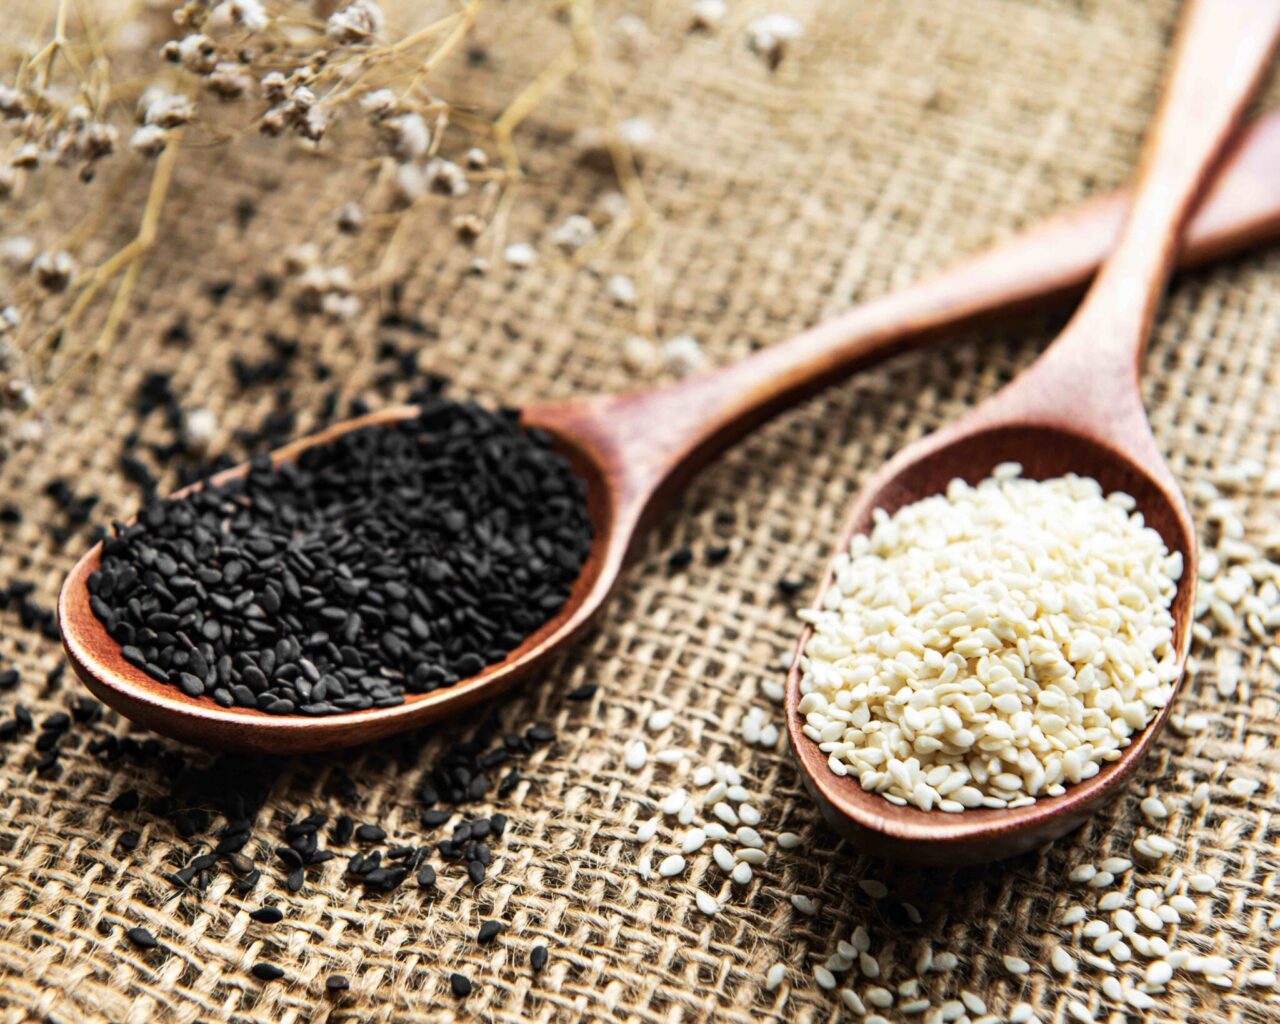 Sesame seeds: ancient nutritious product with strong flavor
